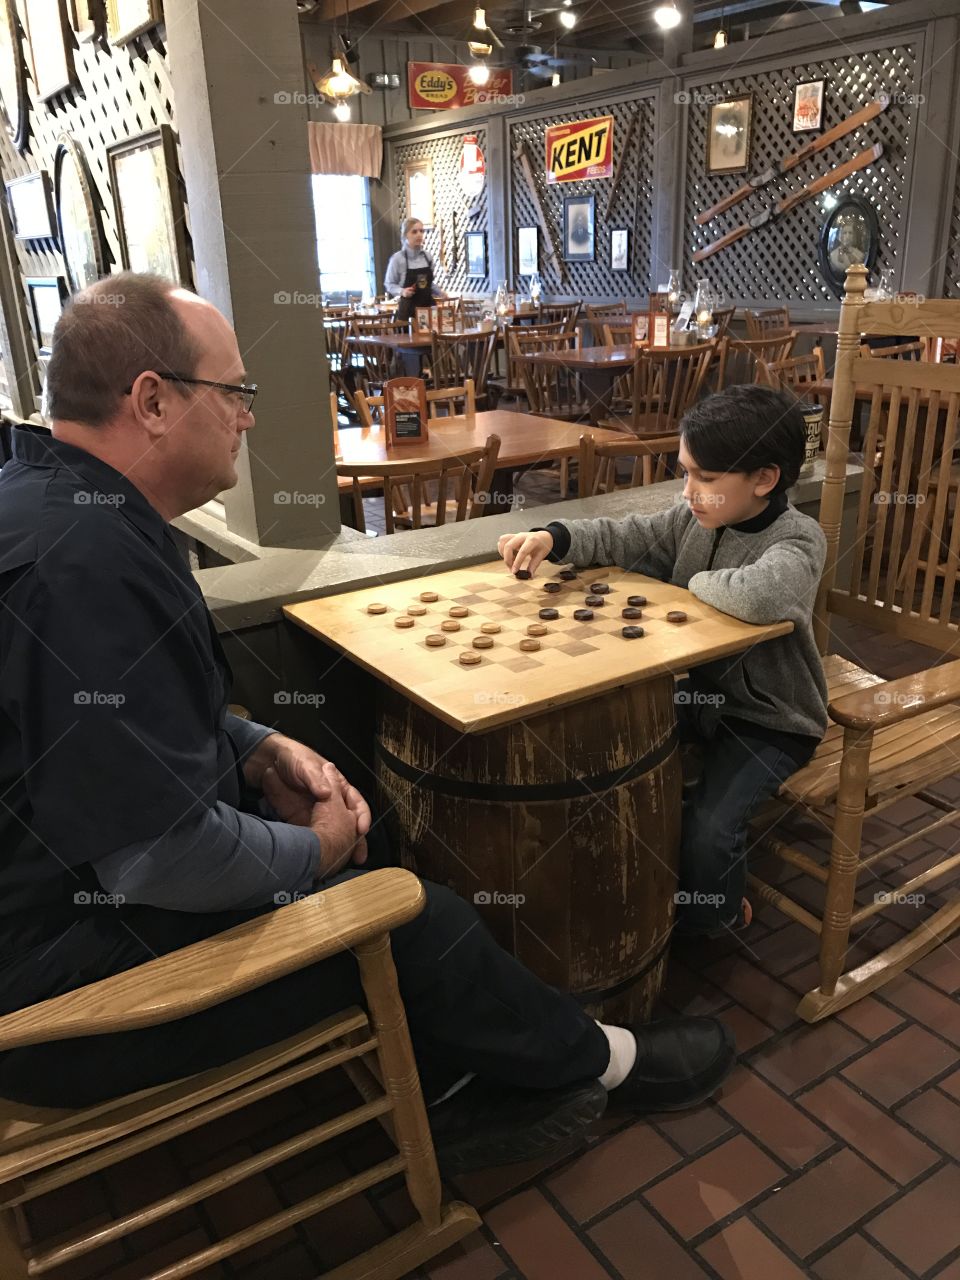 Son and dad playing checkers at Cracker Barrel